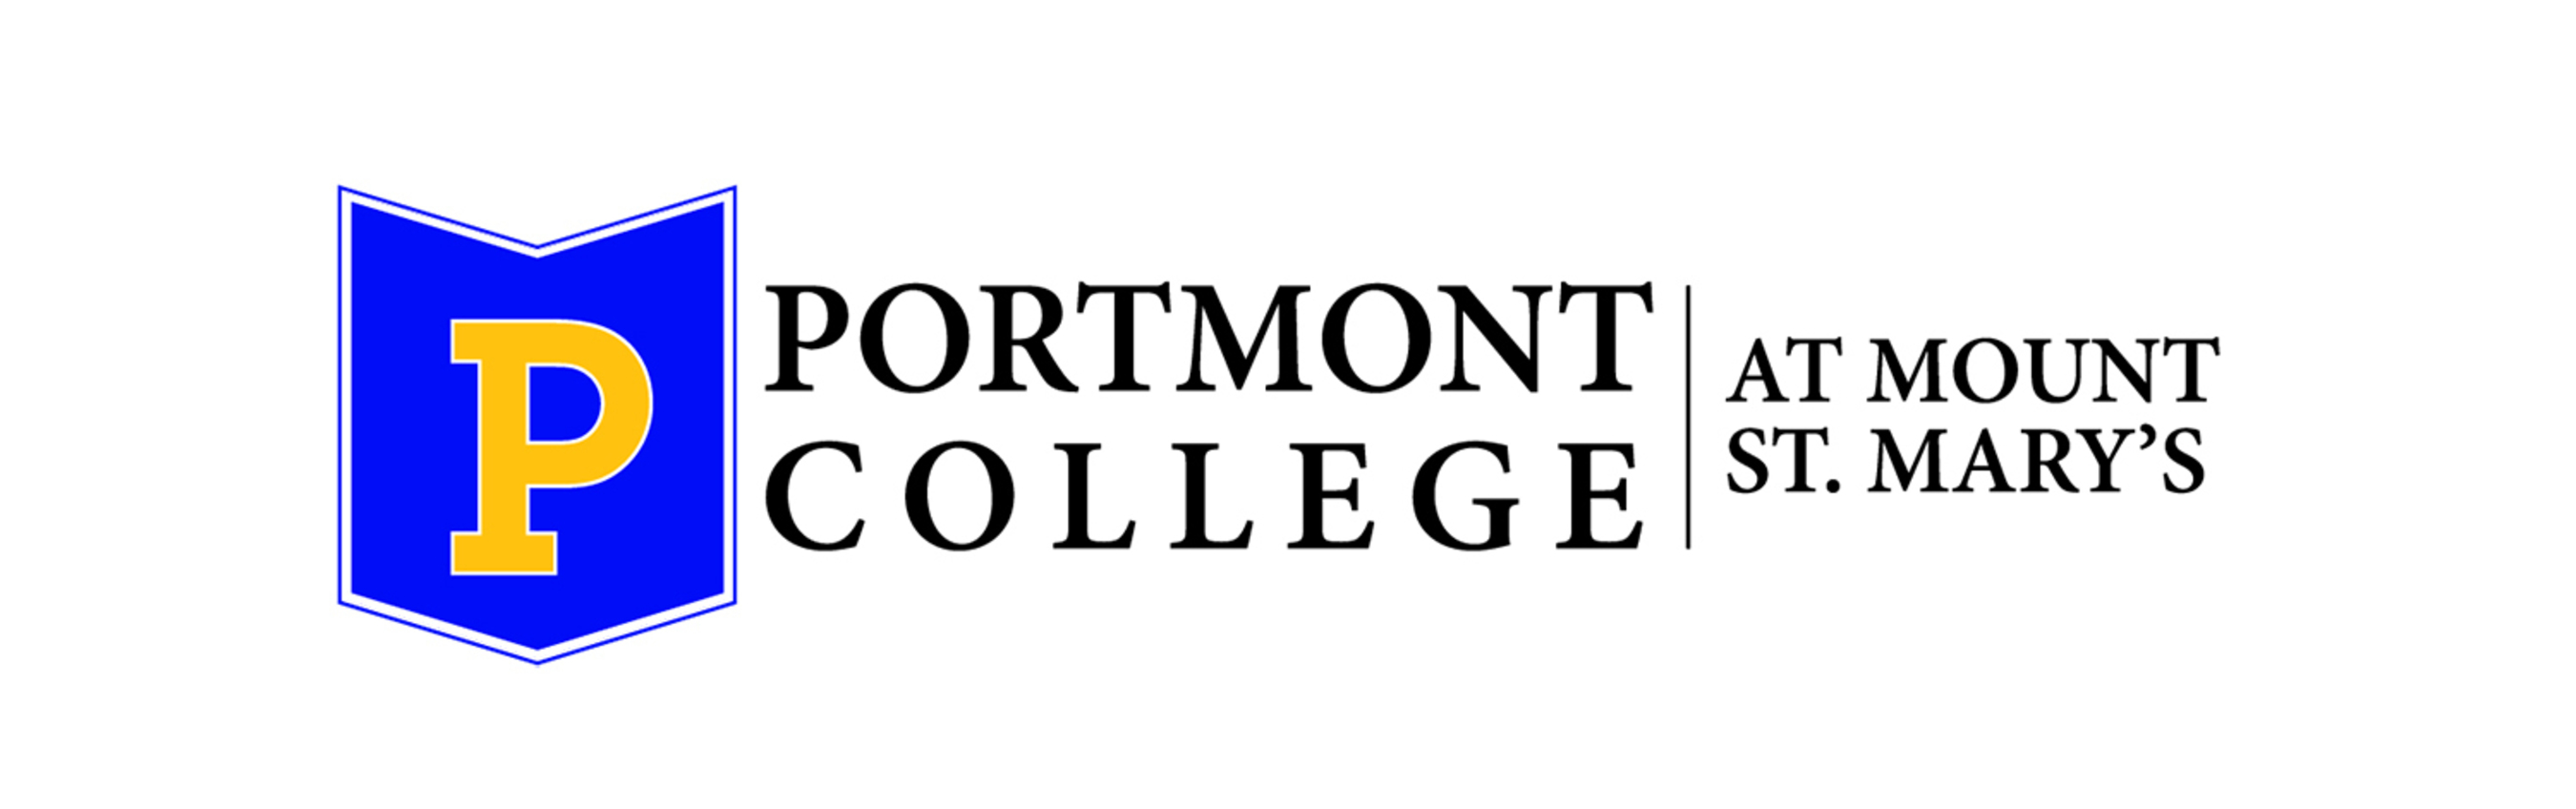 Portmont College at Mount St. Mary’s College launches three online Associate Degree programs in Pre-Health Science, Liberal Arts and Business Administration.  (PRNewsFoto/Mount St. Mary's College)